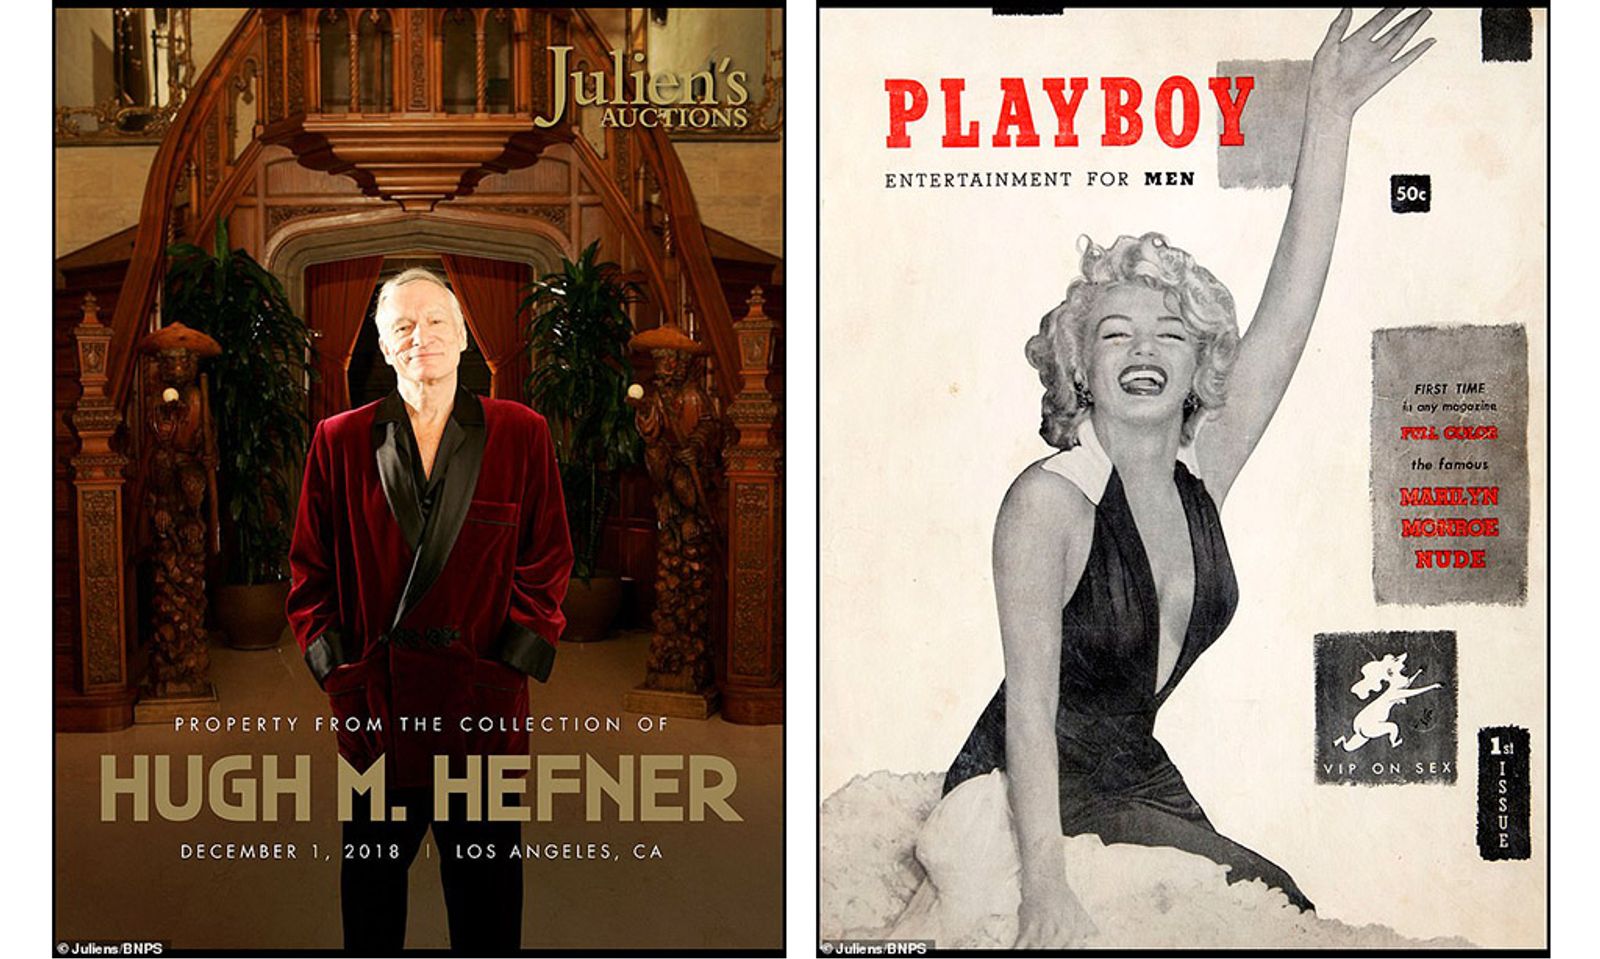 Want A Piece of Hugh Hefner's Life? It's On Auction On Nov. 30